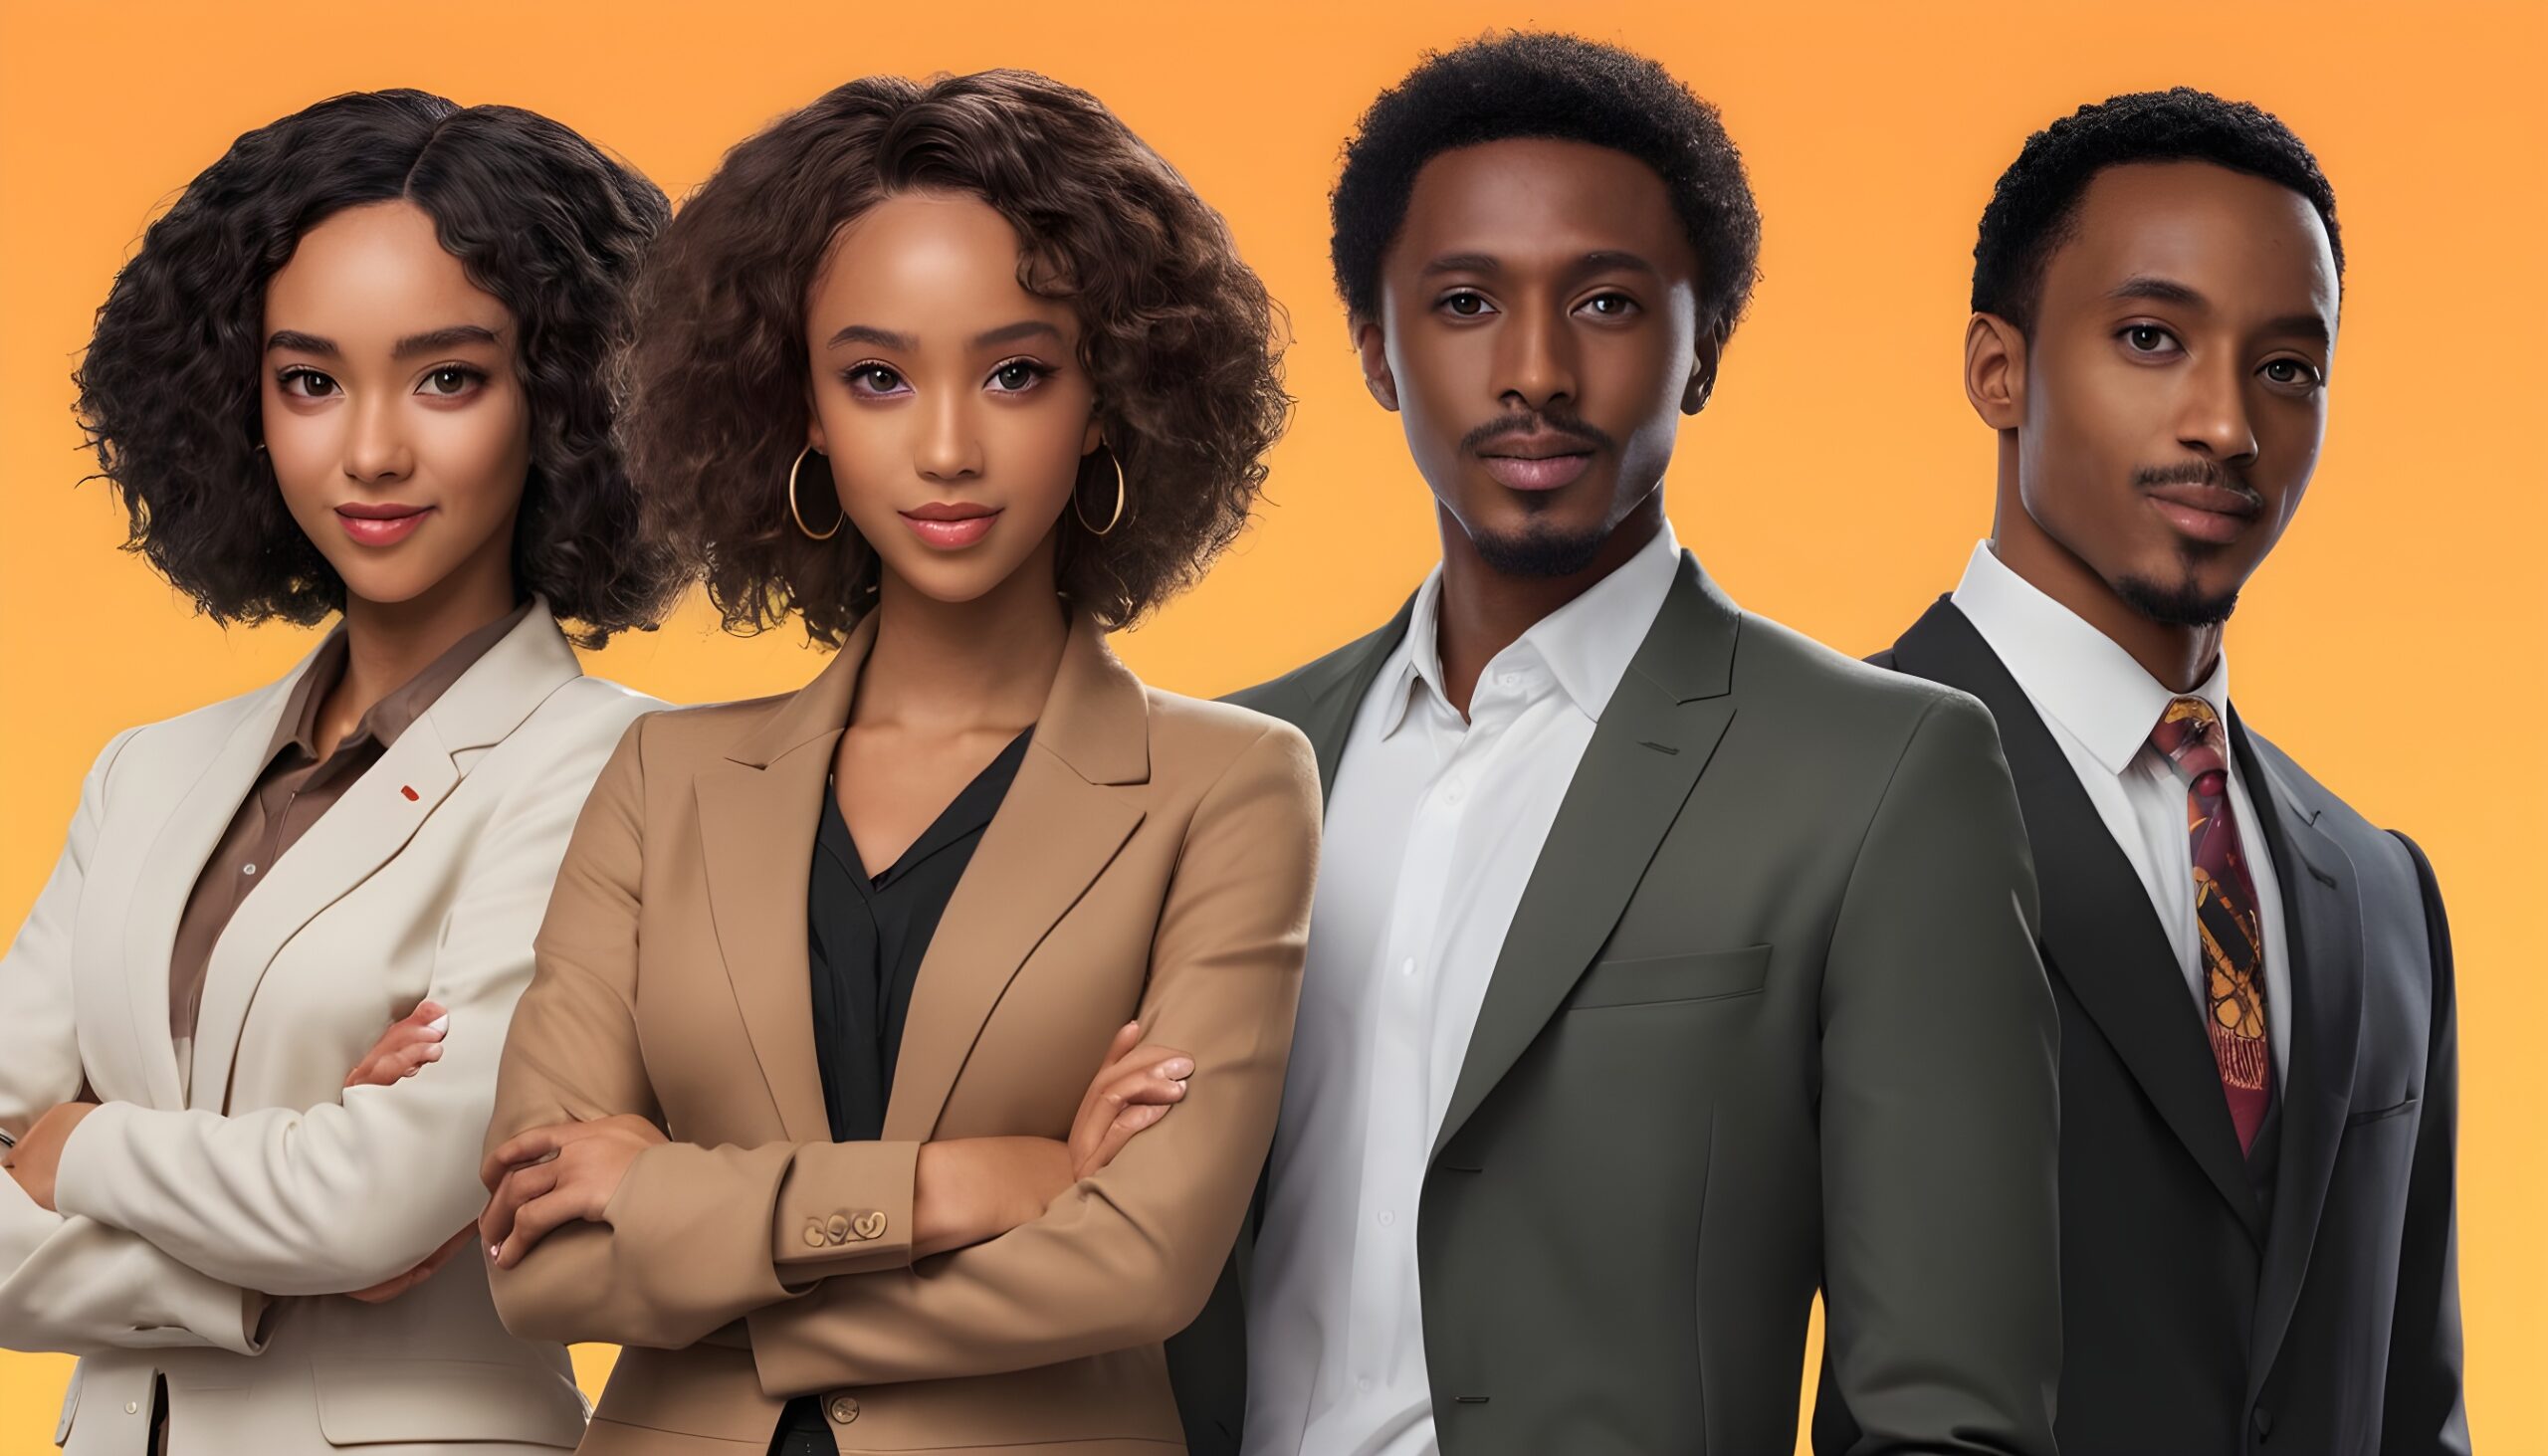 create-a-social-media-post-for-job-board-site-with-black-Ethiopian-men-and-women (1)